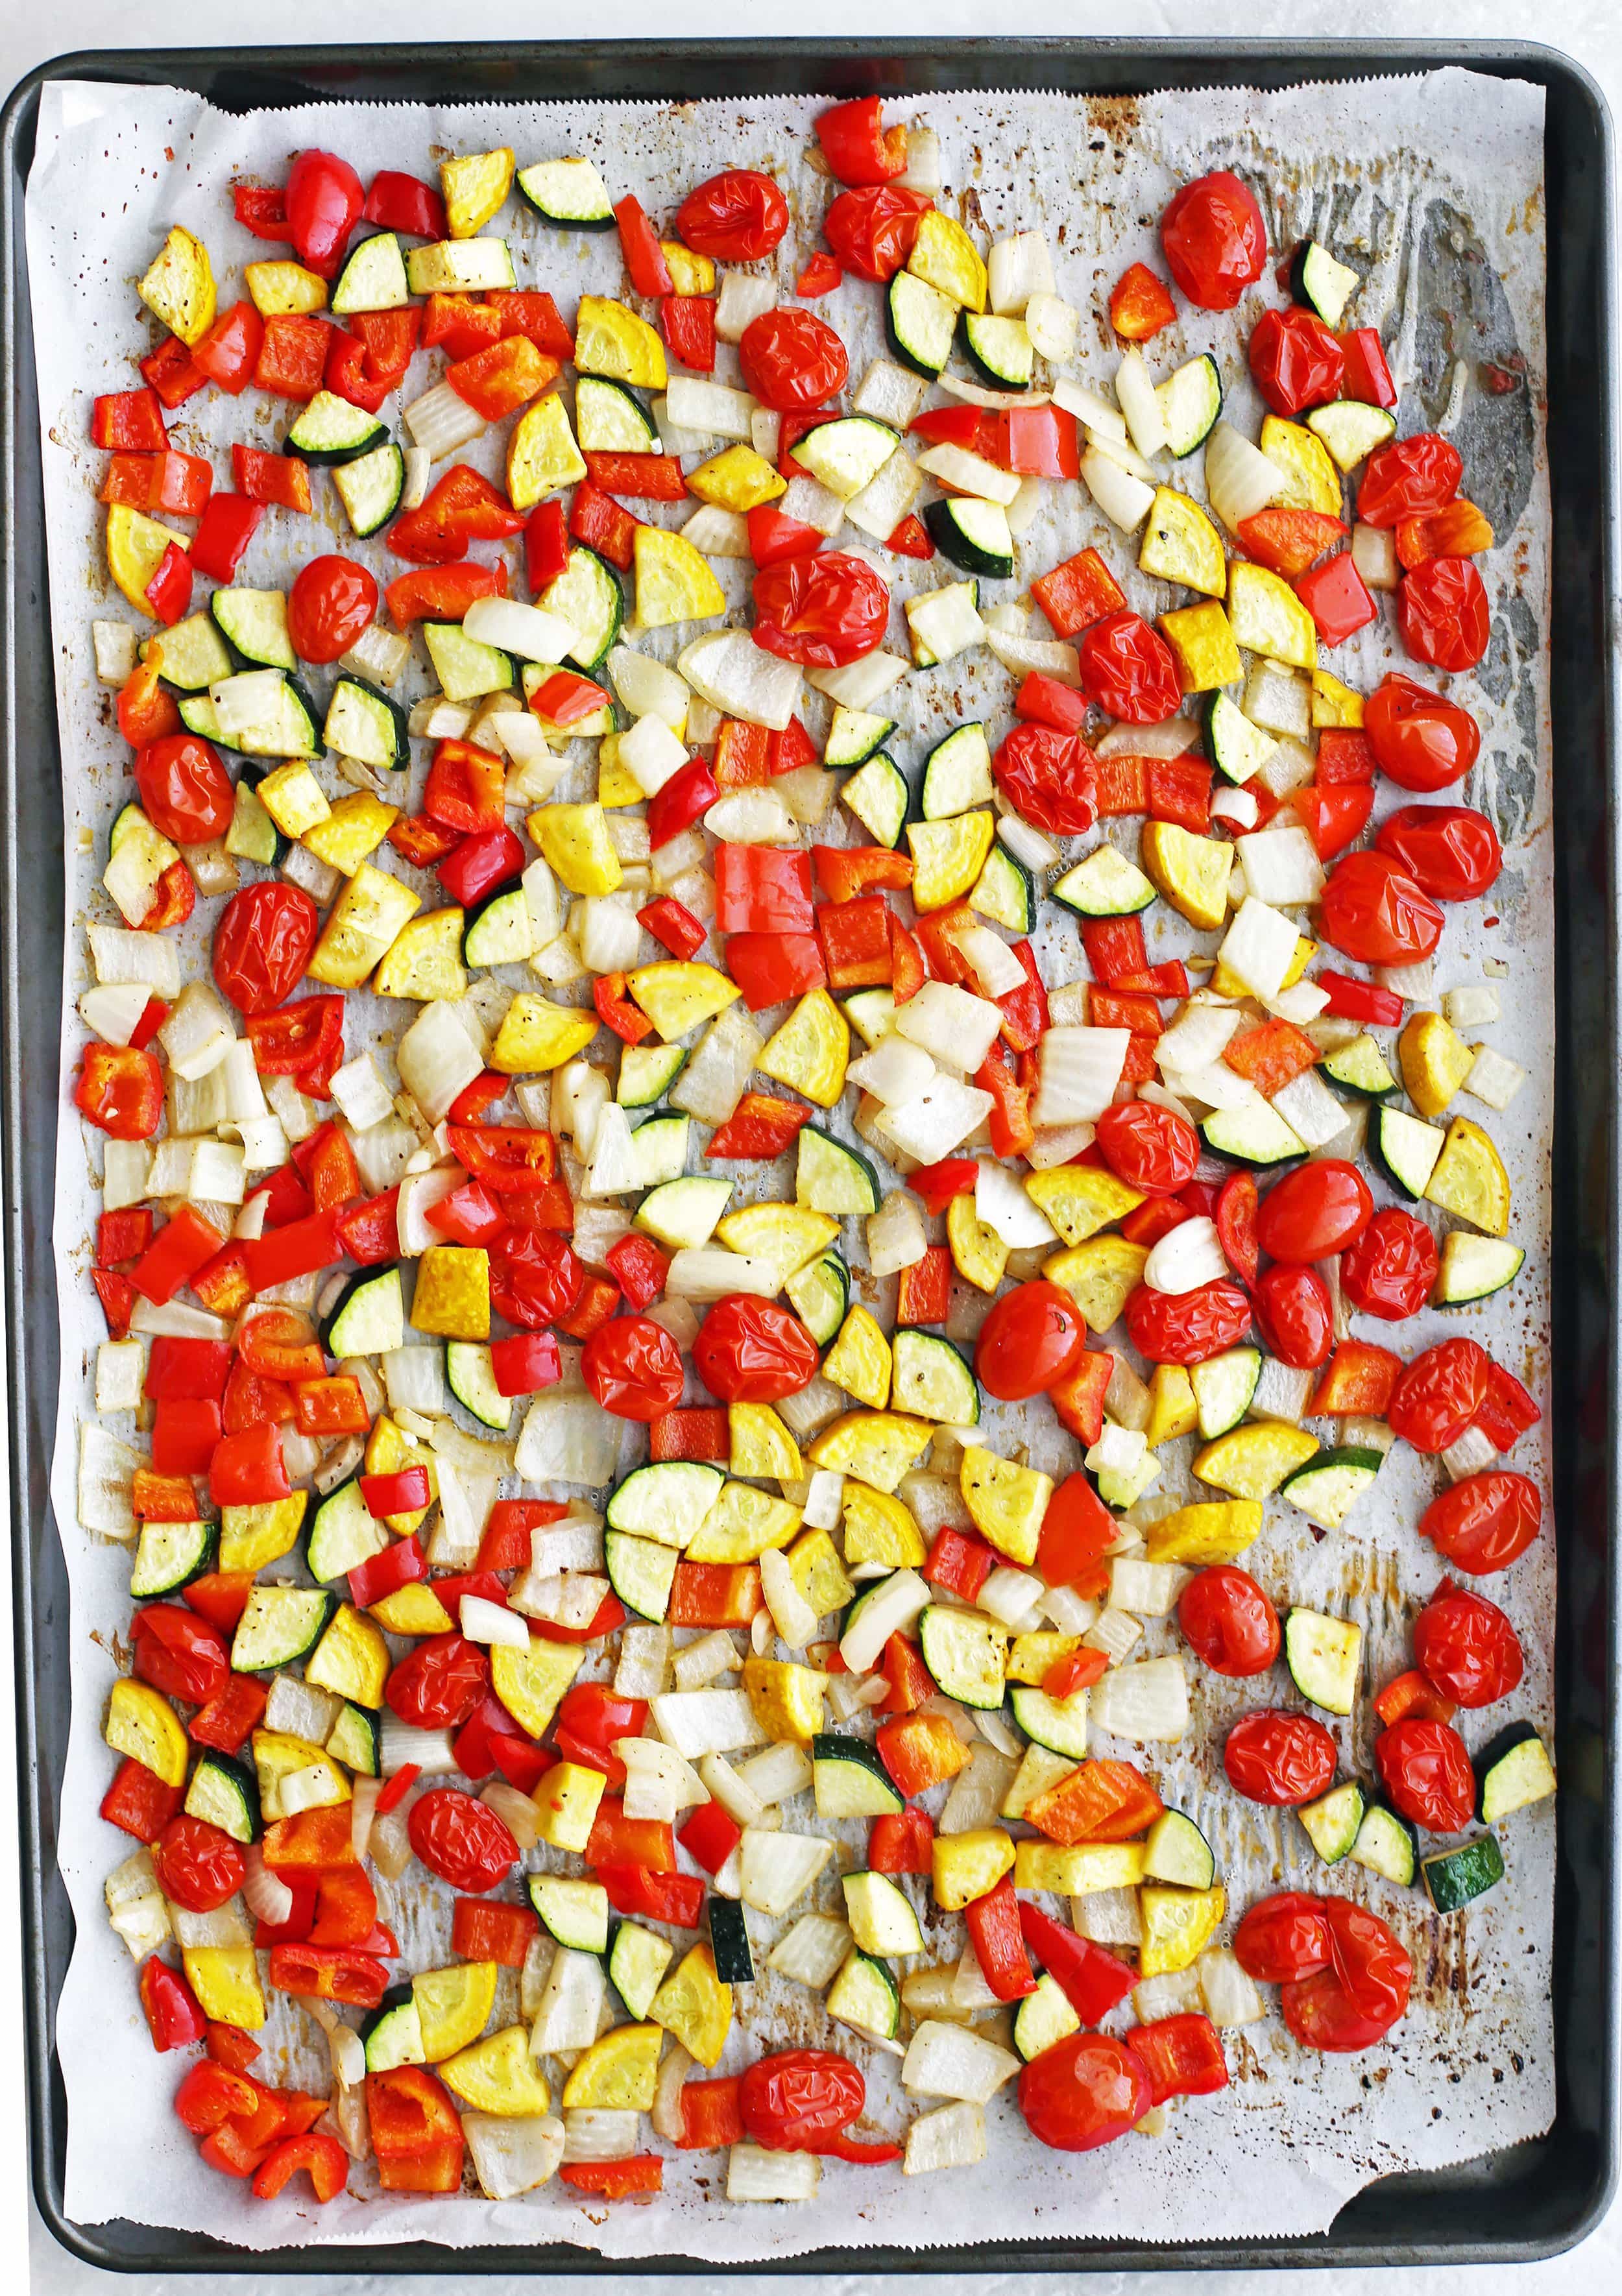 Roasted tomatoes, chopped zucchini, yellow squash, bell peppers, and onions on a baking sheet.